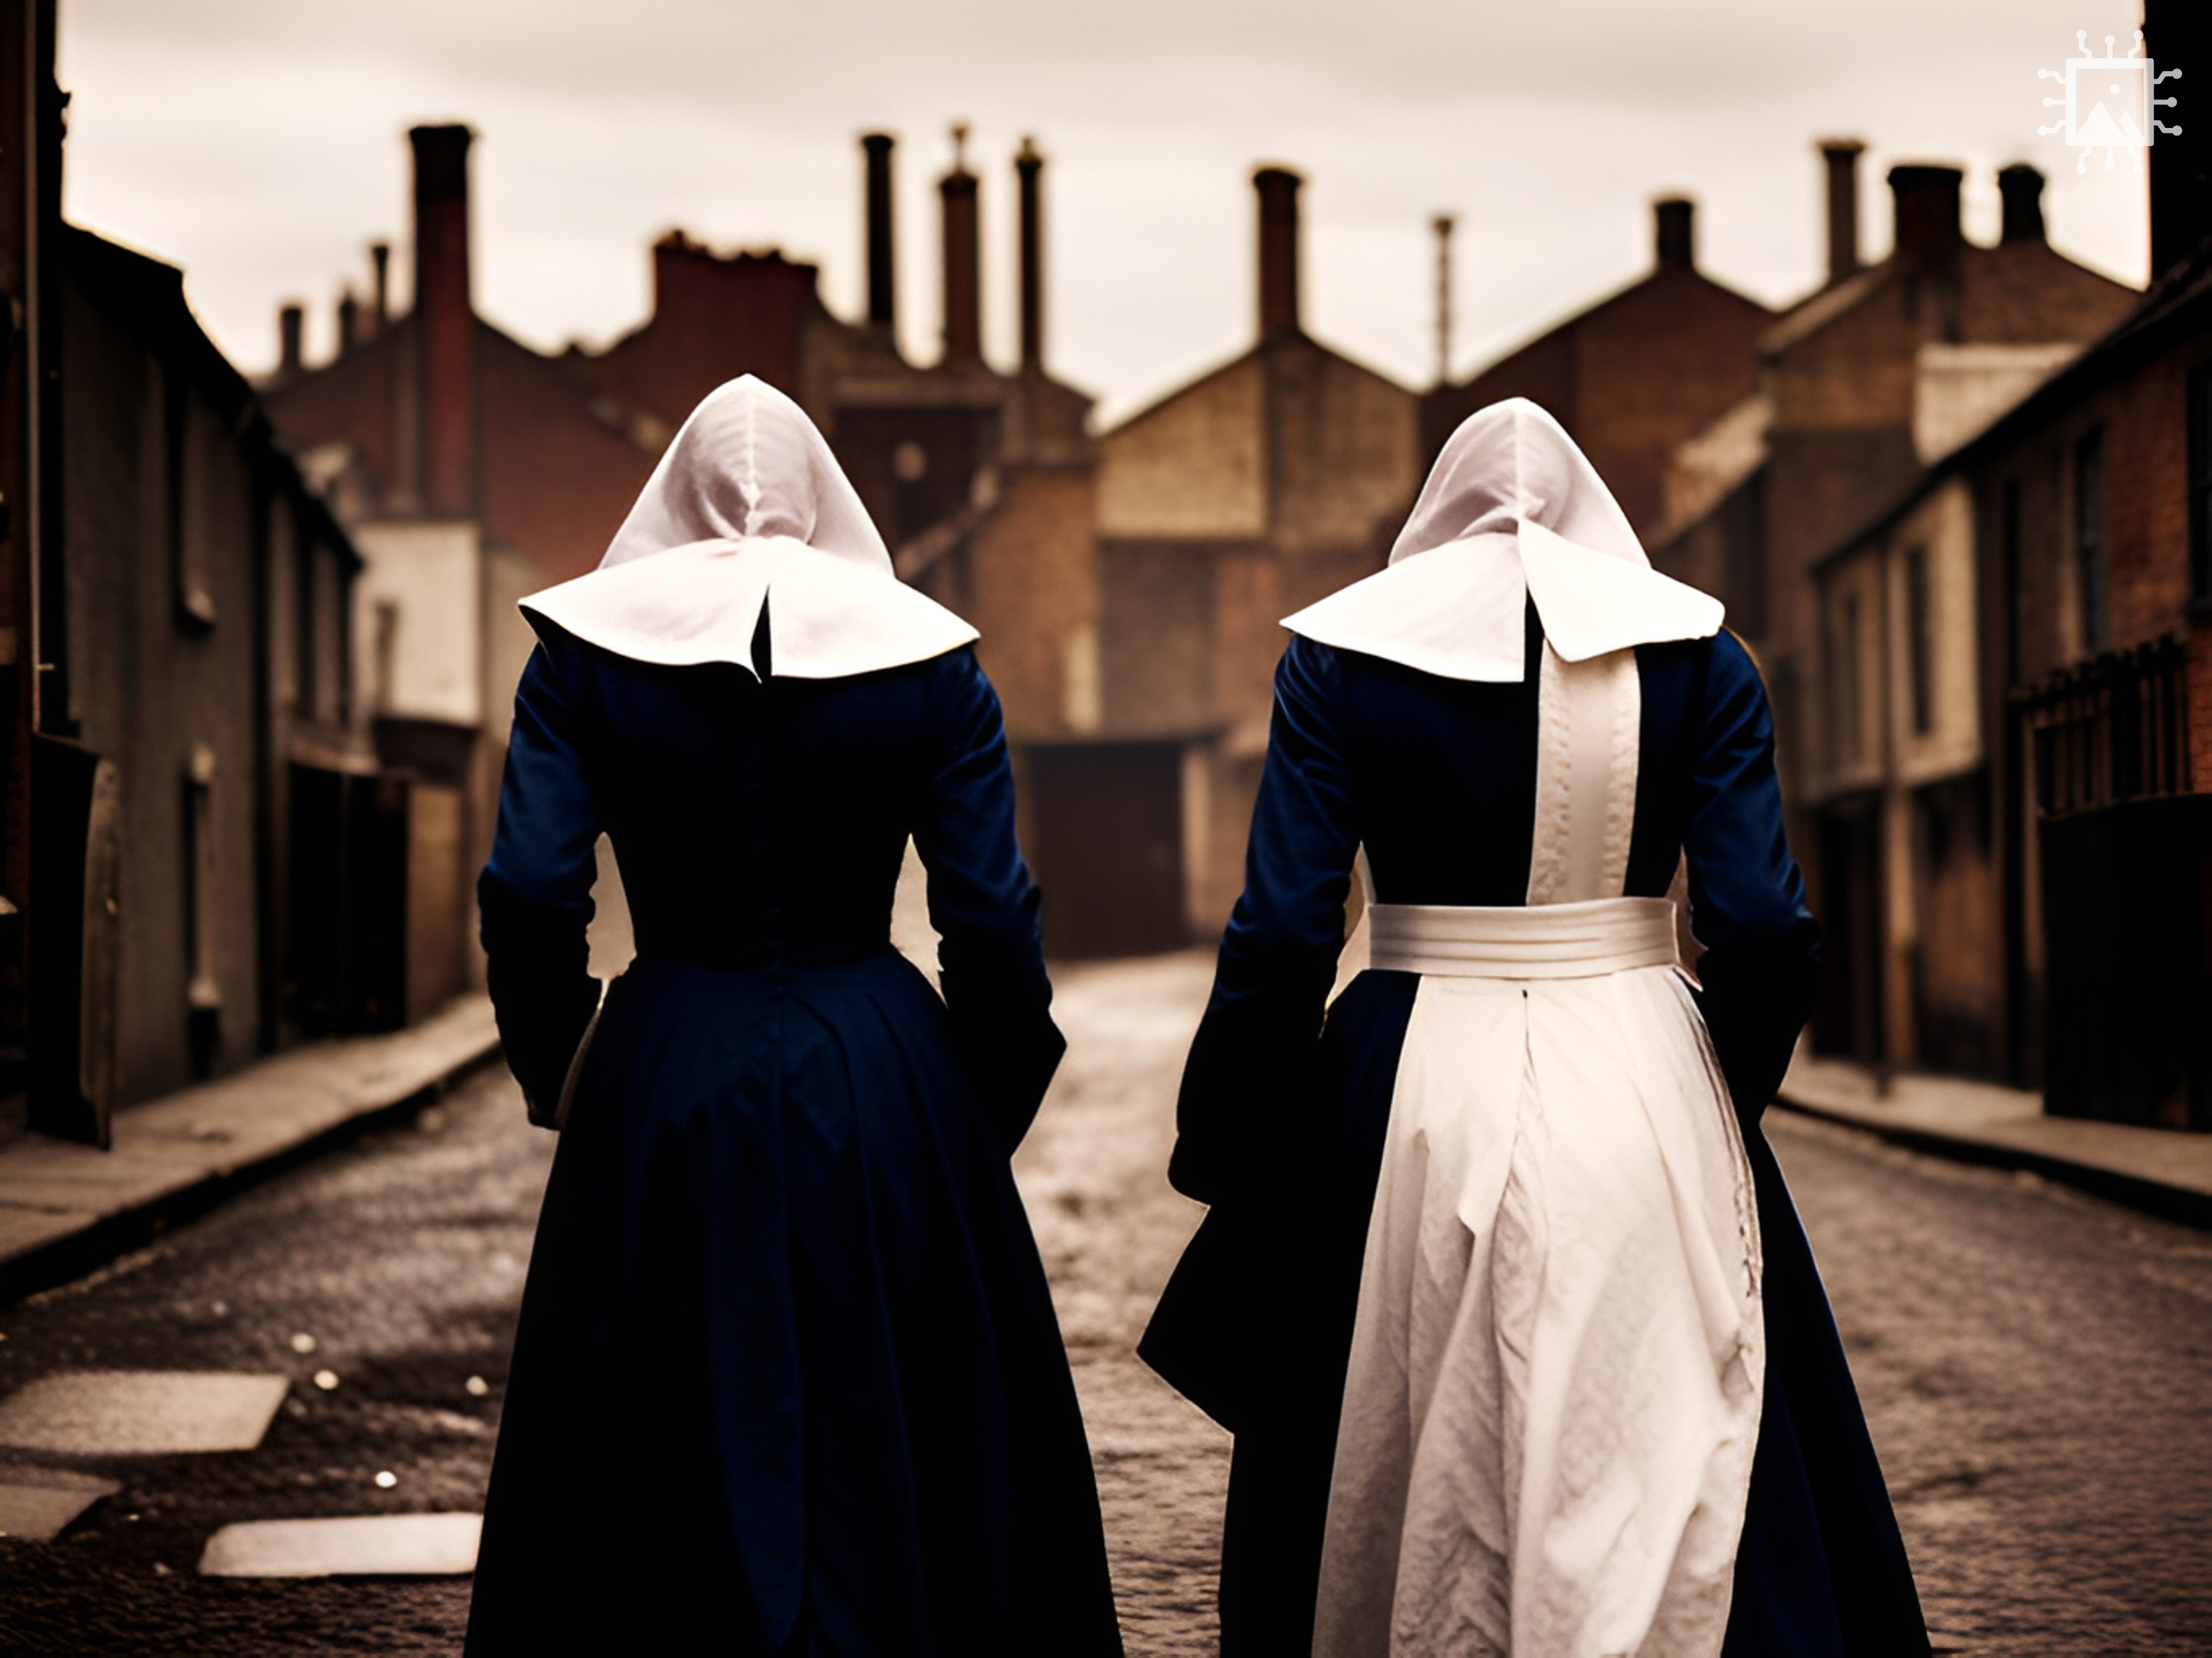 Artificial Intelligence-generated image produced using DreamStudio [accessed 04-06-2023]: 'Two women in dark blue cassocks and white headscalfs walk away through an East End London slum in the 19th century.' Find out more: rochestercathedral.org/research/ai